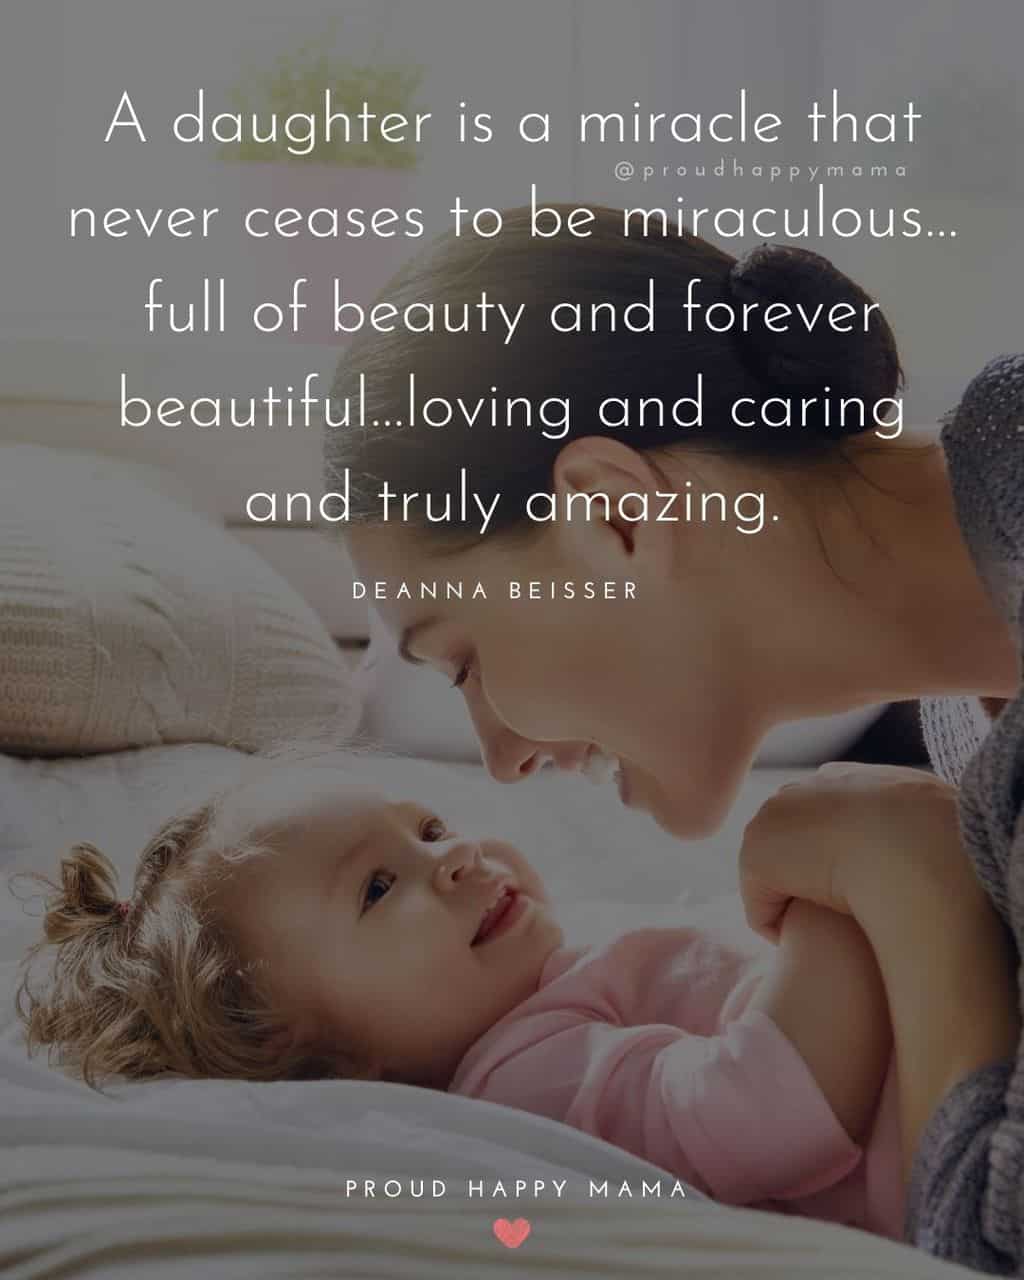 proud mom quotes for daughter - ‘A daughter is a miracle that never ceases to be miraculous…full of beauty and forever beautiful…loving and caring and